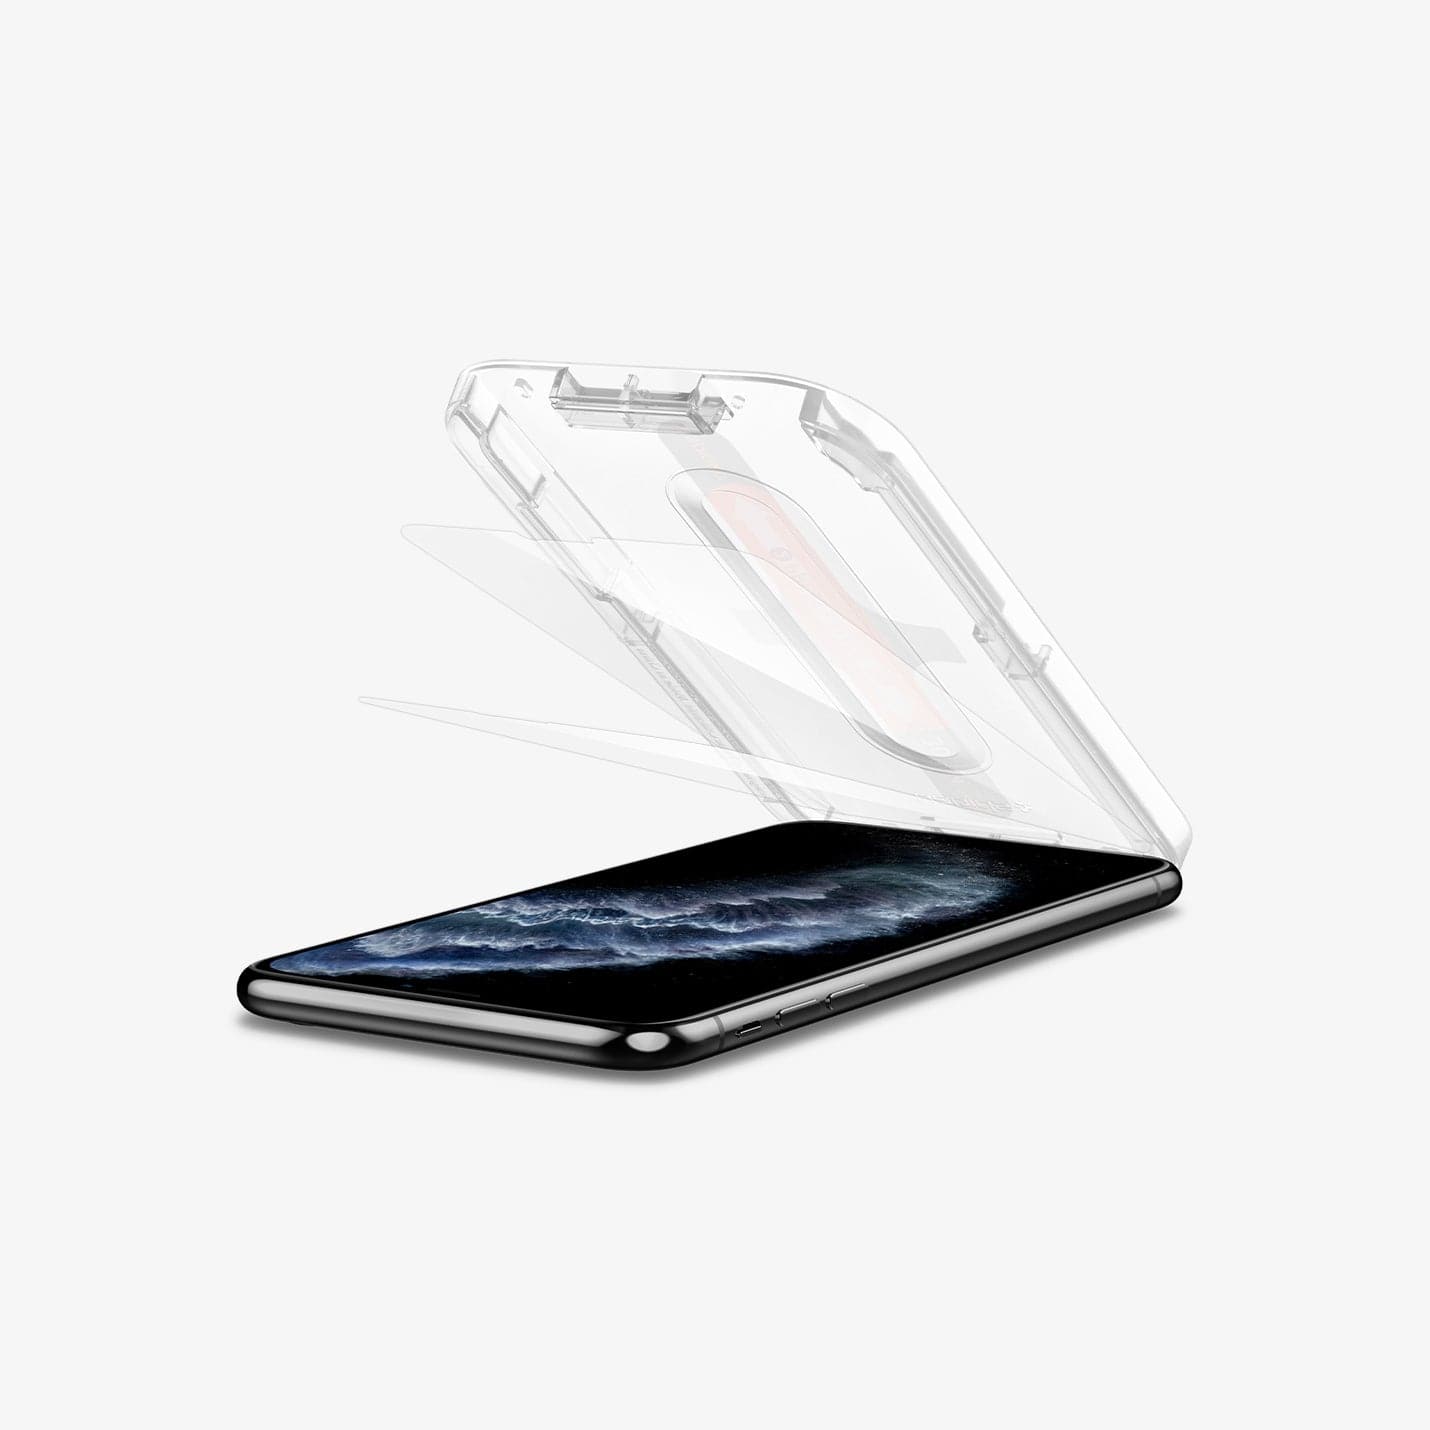 065GL25359 - iPhone XS Max Screen Protector GLAS.tR EZ Fit showing the ez fit tray and screen protector being installed on device